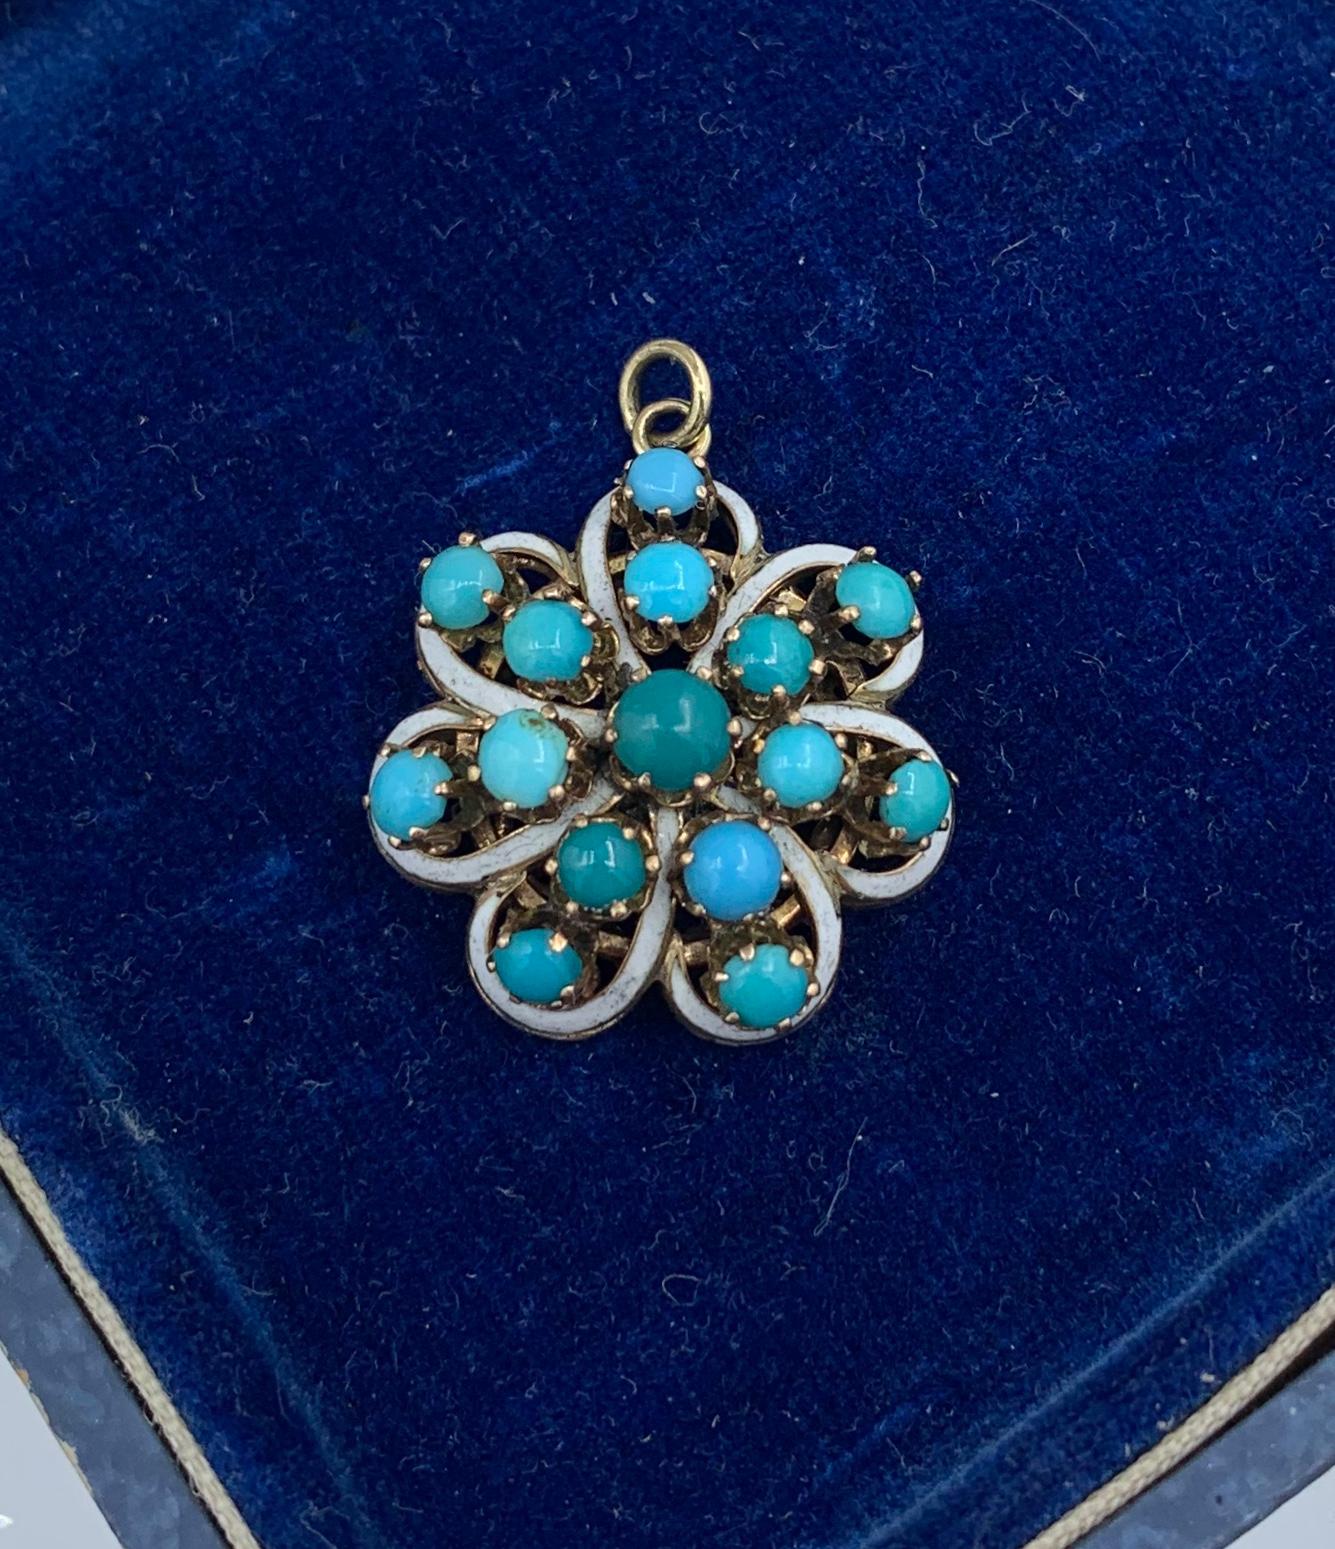 This is a stunning Victorian - Art Nouveau Pendant set with fabulous Turquoise cabochons in a swirling design with White Enamel in 14 Karat Gold.  I just love this combination of the blue and green turquoise with the white enamel.  It is fresh and